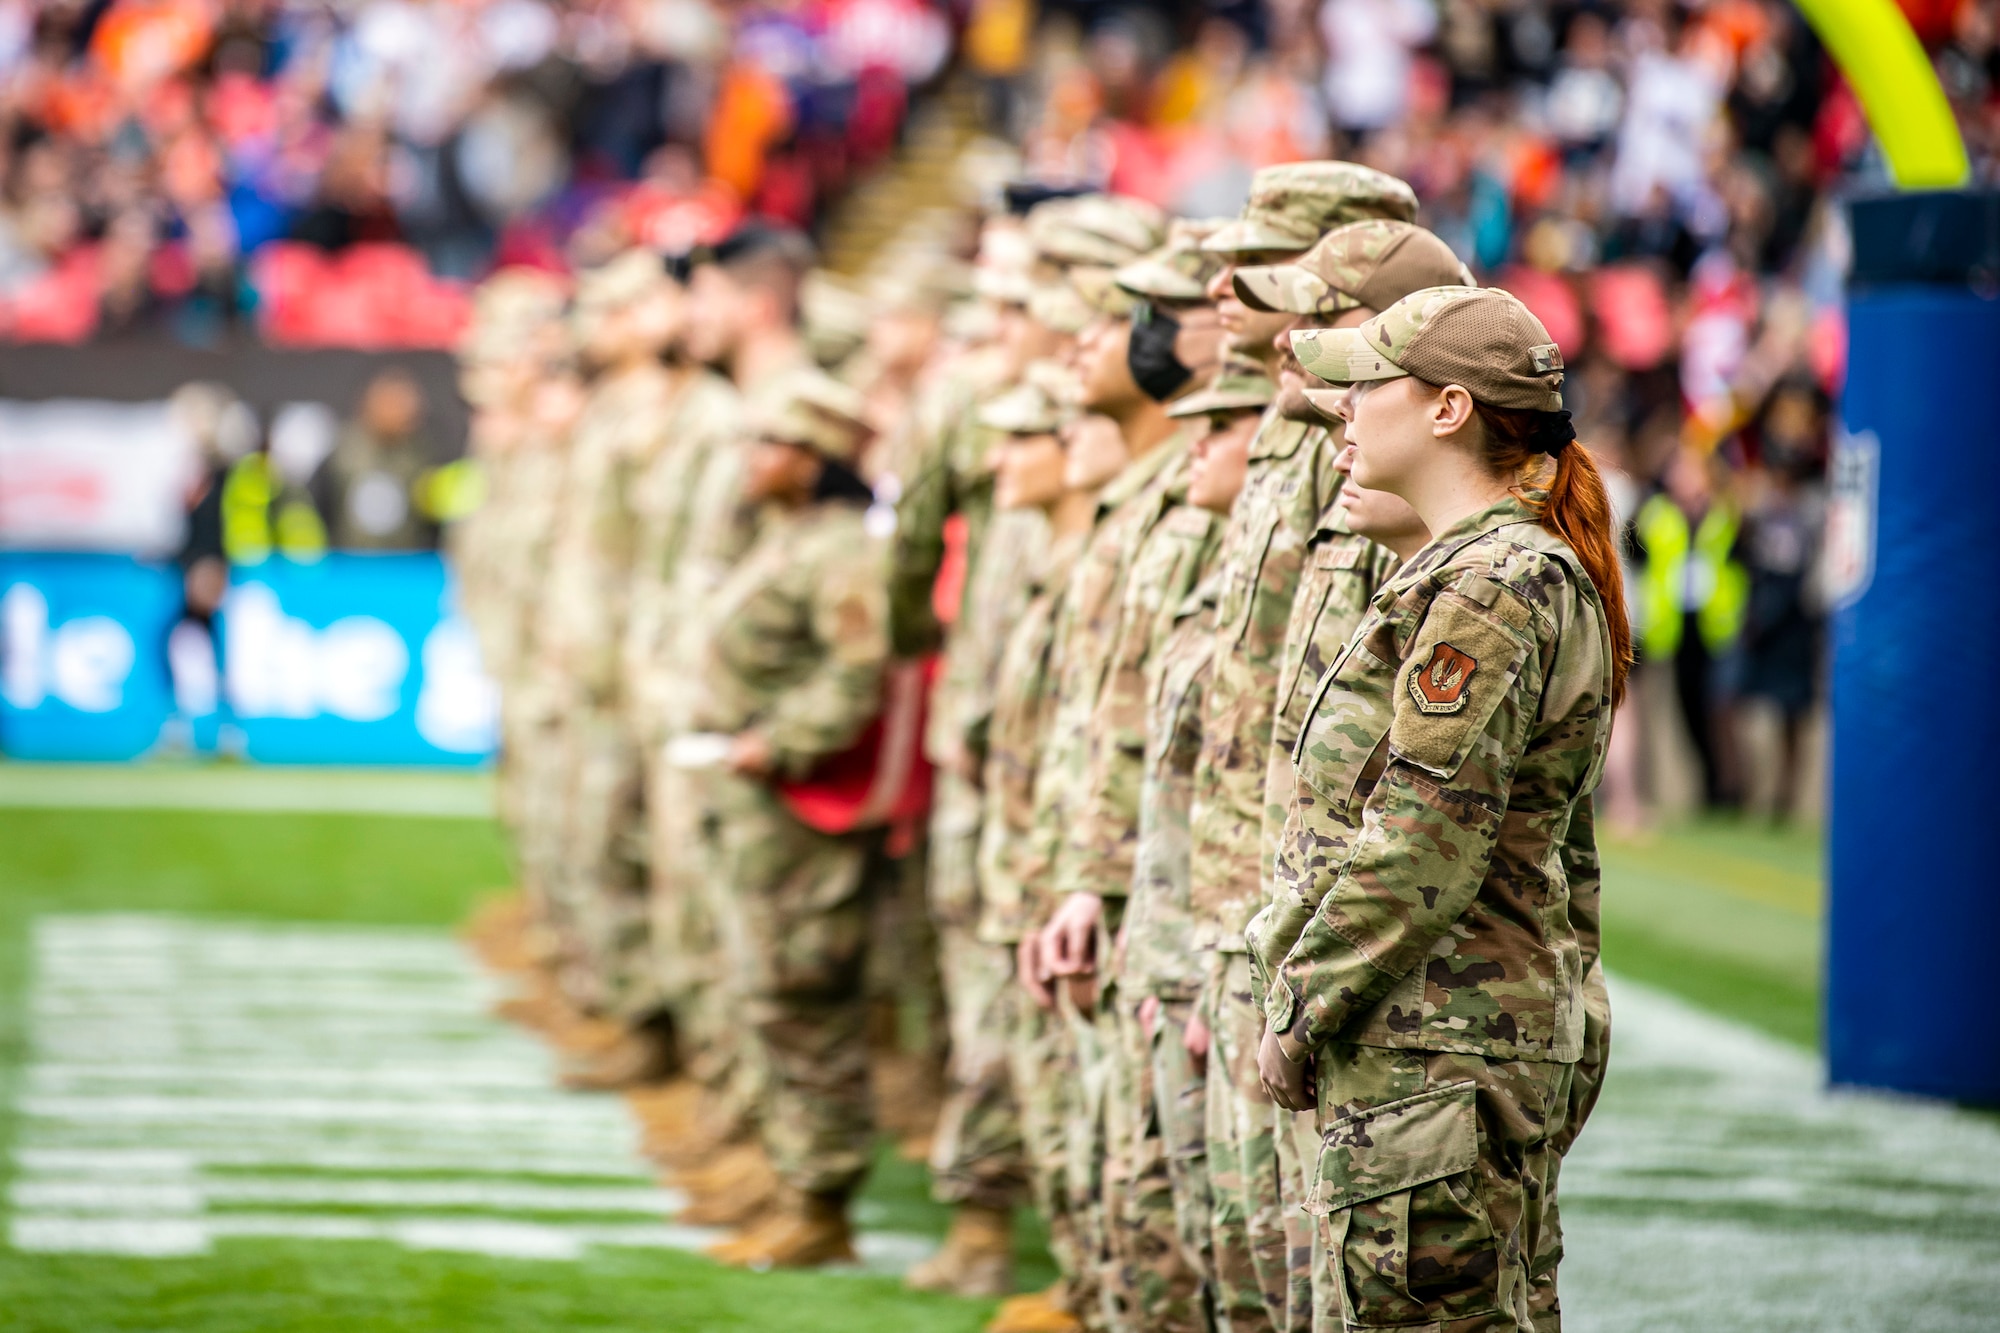 Airmen from the 501st Combat Support Wing stand at attention prior to the national anthem at Wembley Stadium, in London, England, Oct. 30, 2022. Approximately 70 uniformed personnel represented the U.S. Air Force and nation by unveiling an American flag during the pre-game ceremonies of the Jacksonville Jaguars and Denver Broncos NFL game. (U.S. Air Force photo by Staff Sgt. Eugene Oliver)